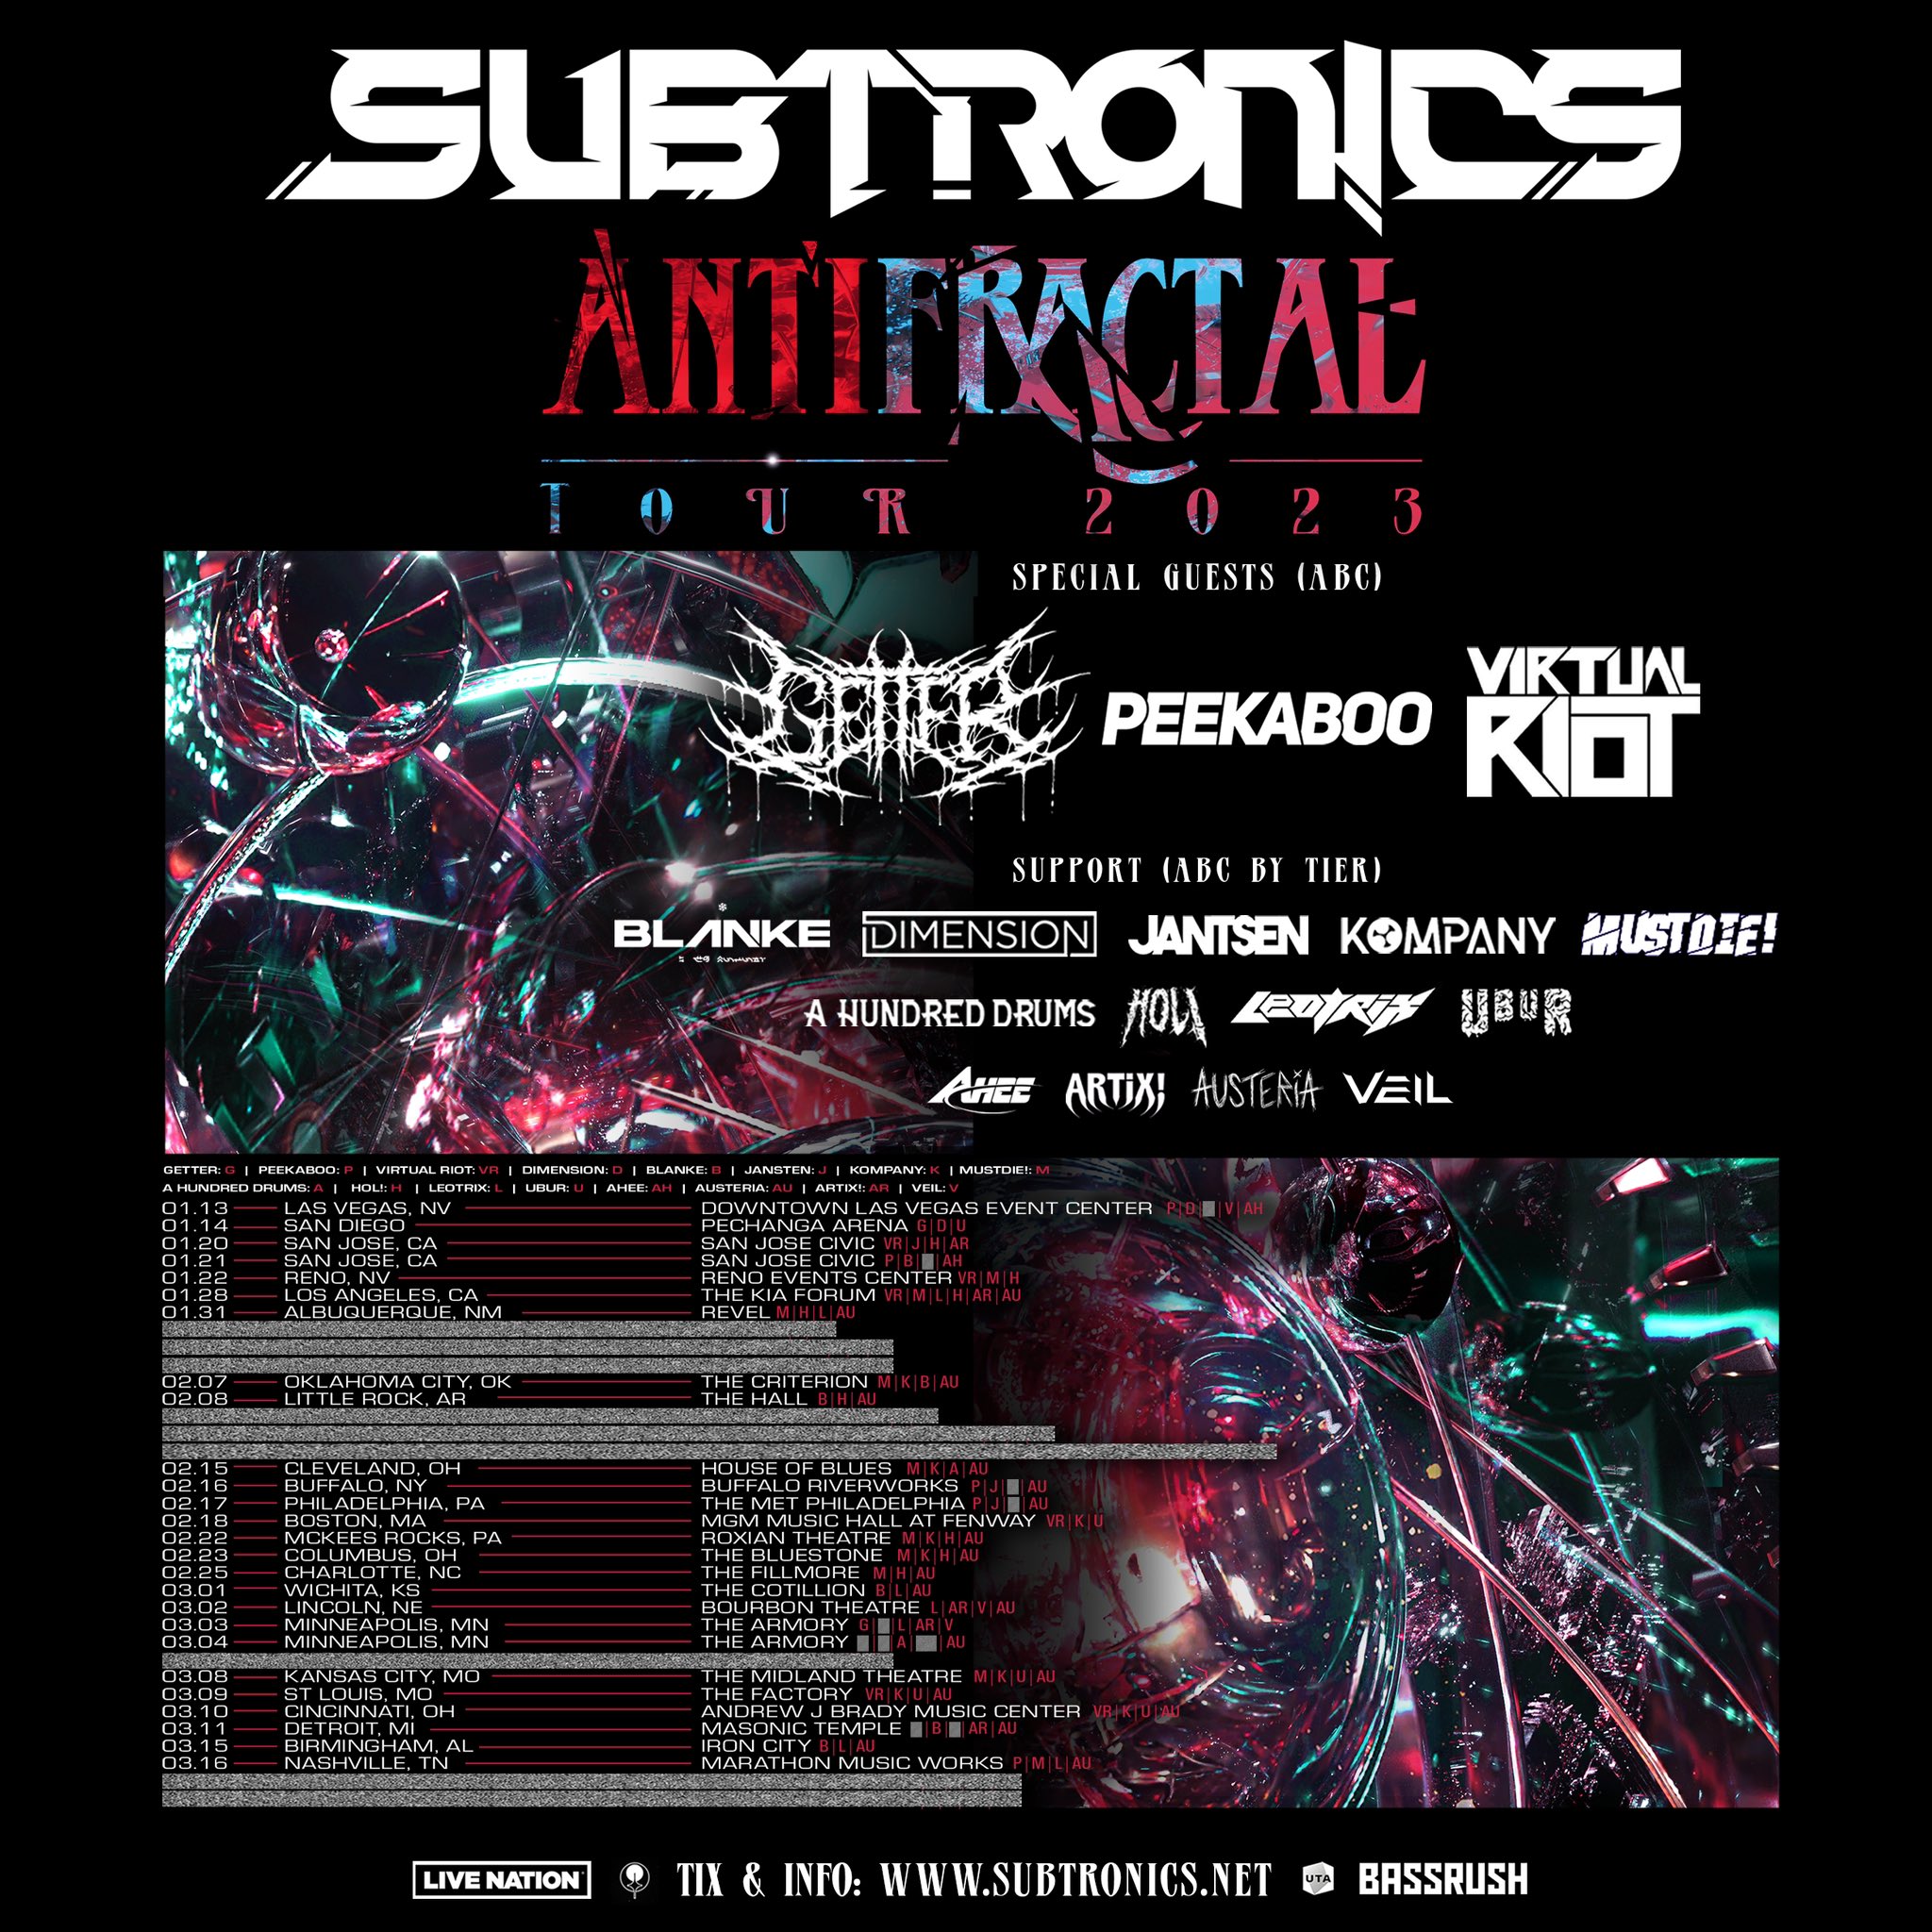 ✨ANTIFRACTAL TOUR✨ on Twitter: "ANTIFRACTAL 2023 TOUR TICKETS ON SALE THIS  FRIDAY AT 10AM LOCAL https://t.co/P00fNQBJVW" / Twitter